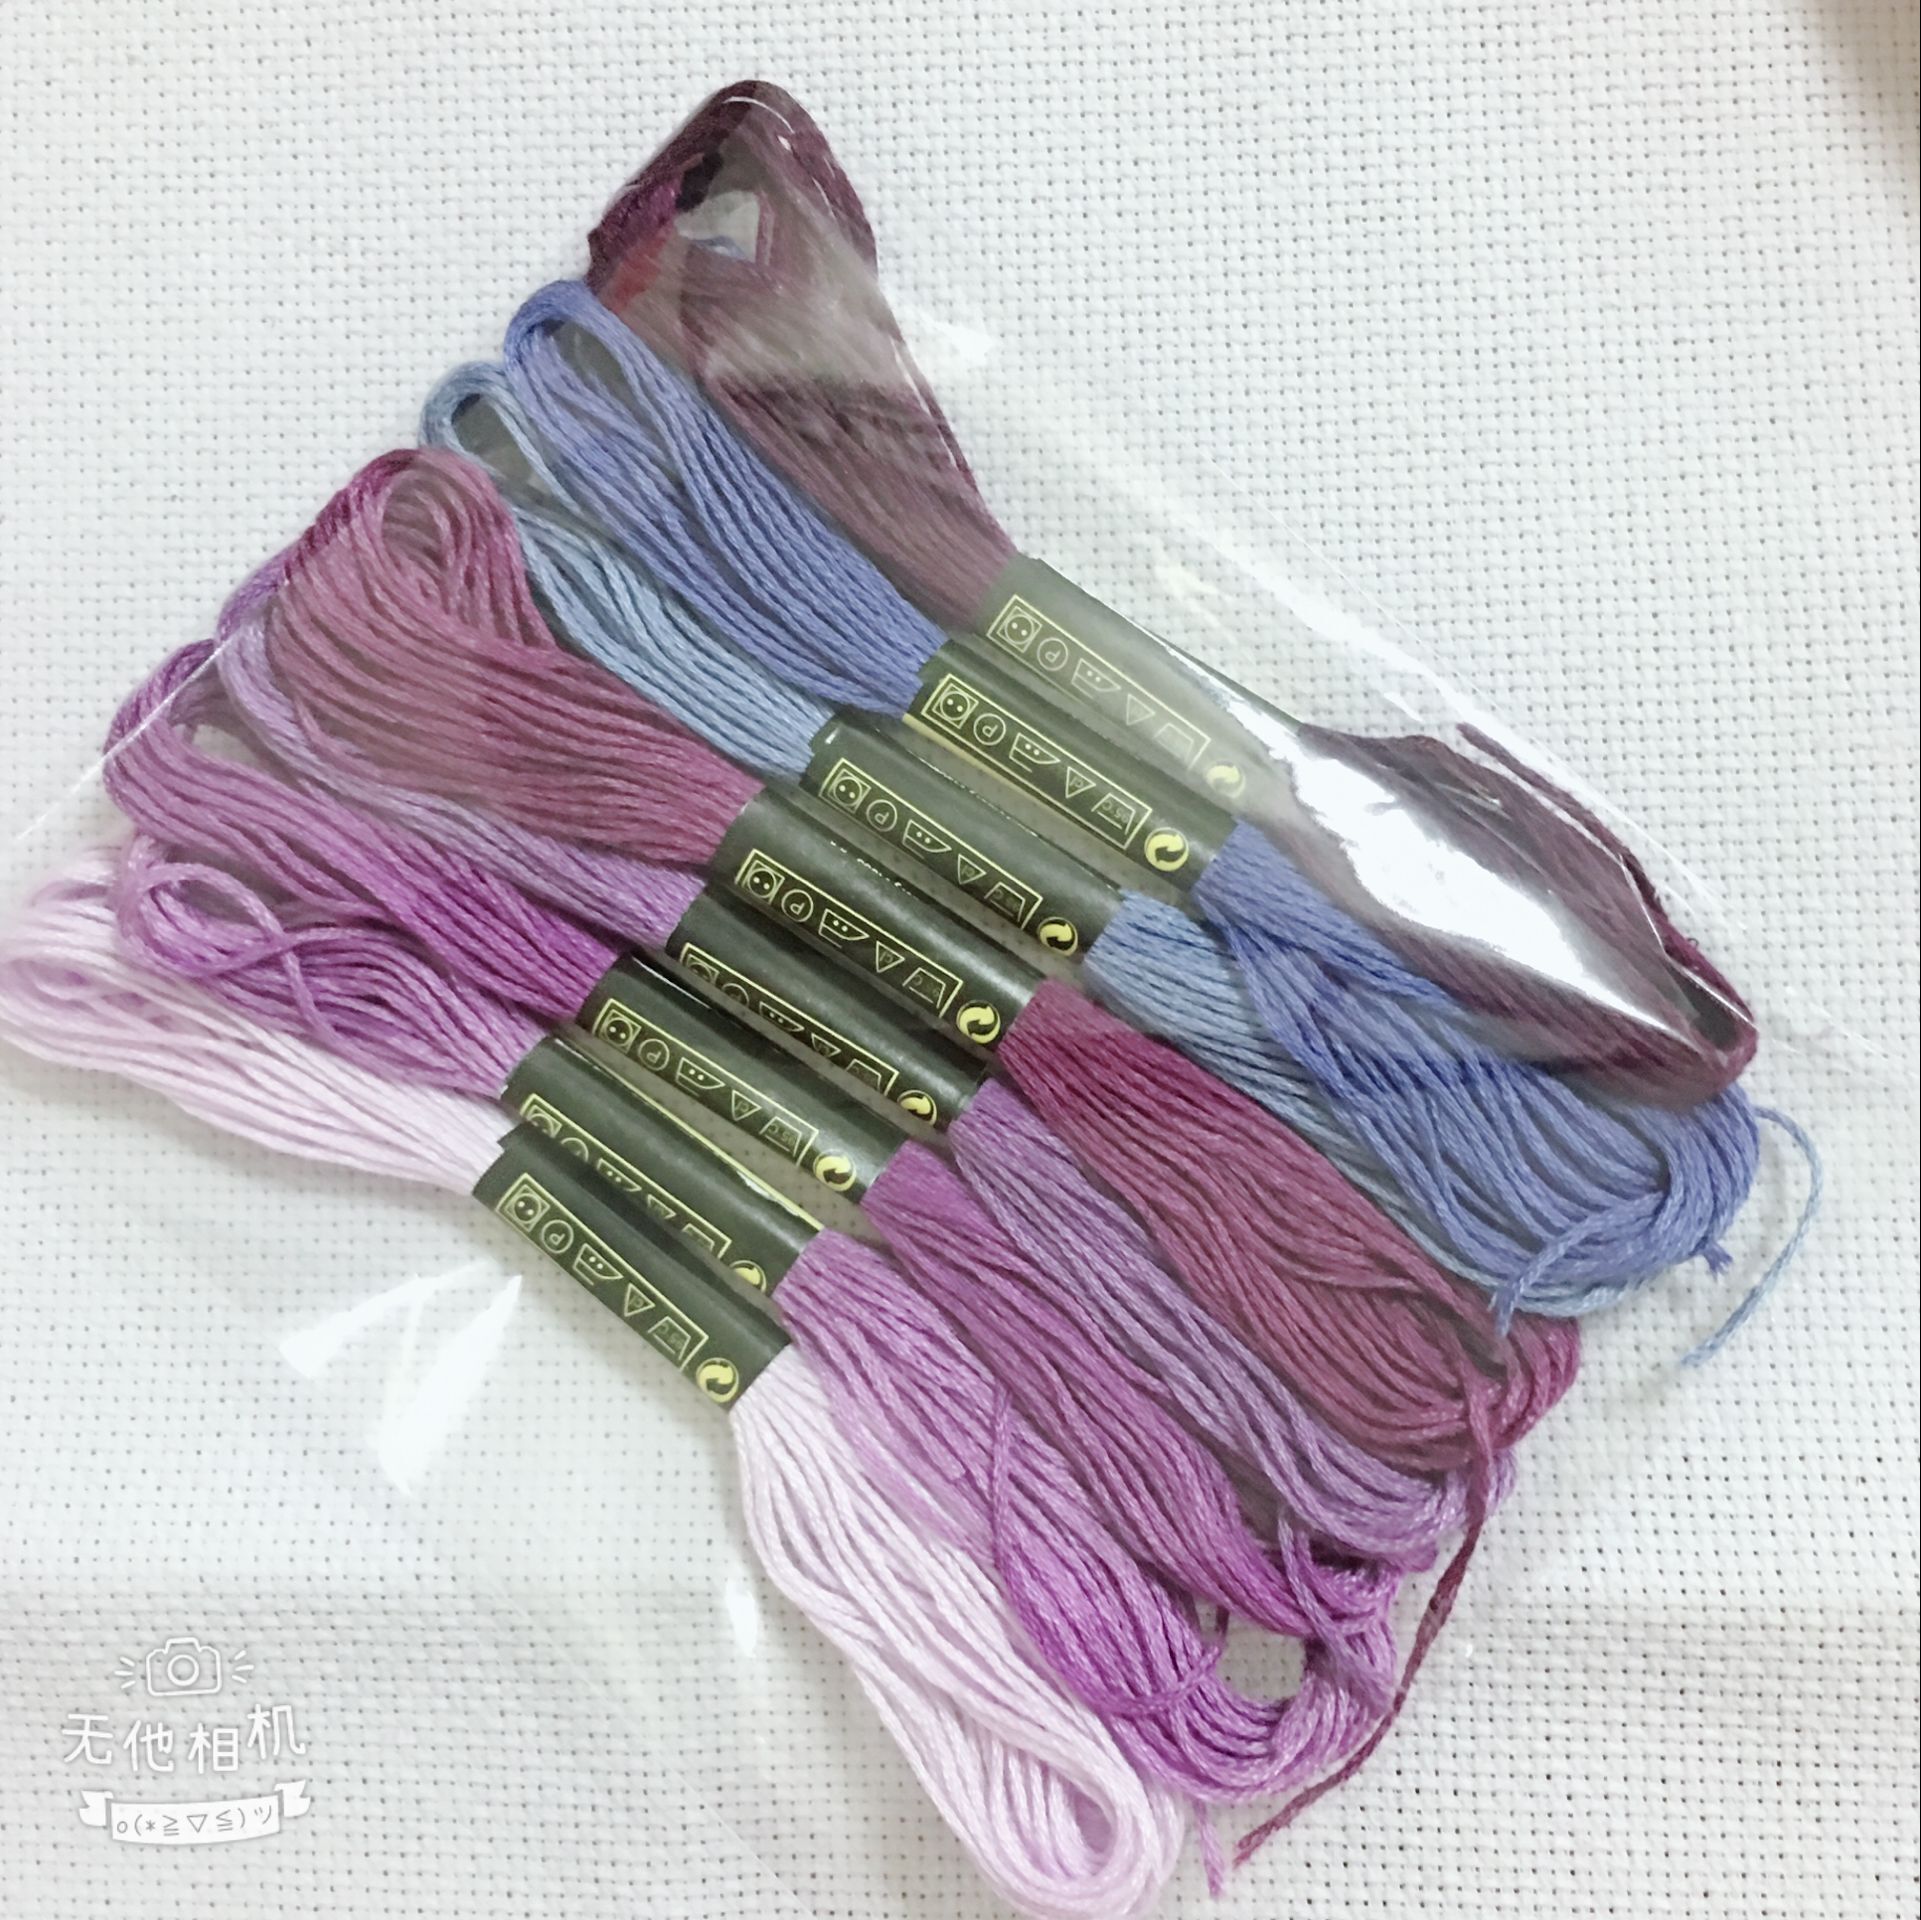 8Pcs Mix Colors 8 Meters Cross Stitch Cotton Sewing Skeins Craft Embroidery Thread Floss Kit DIY Sewing Tools 8